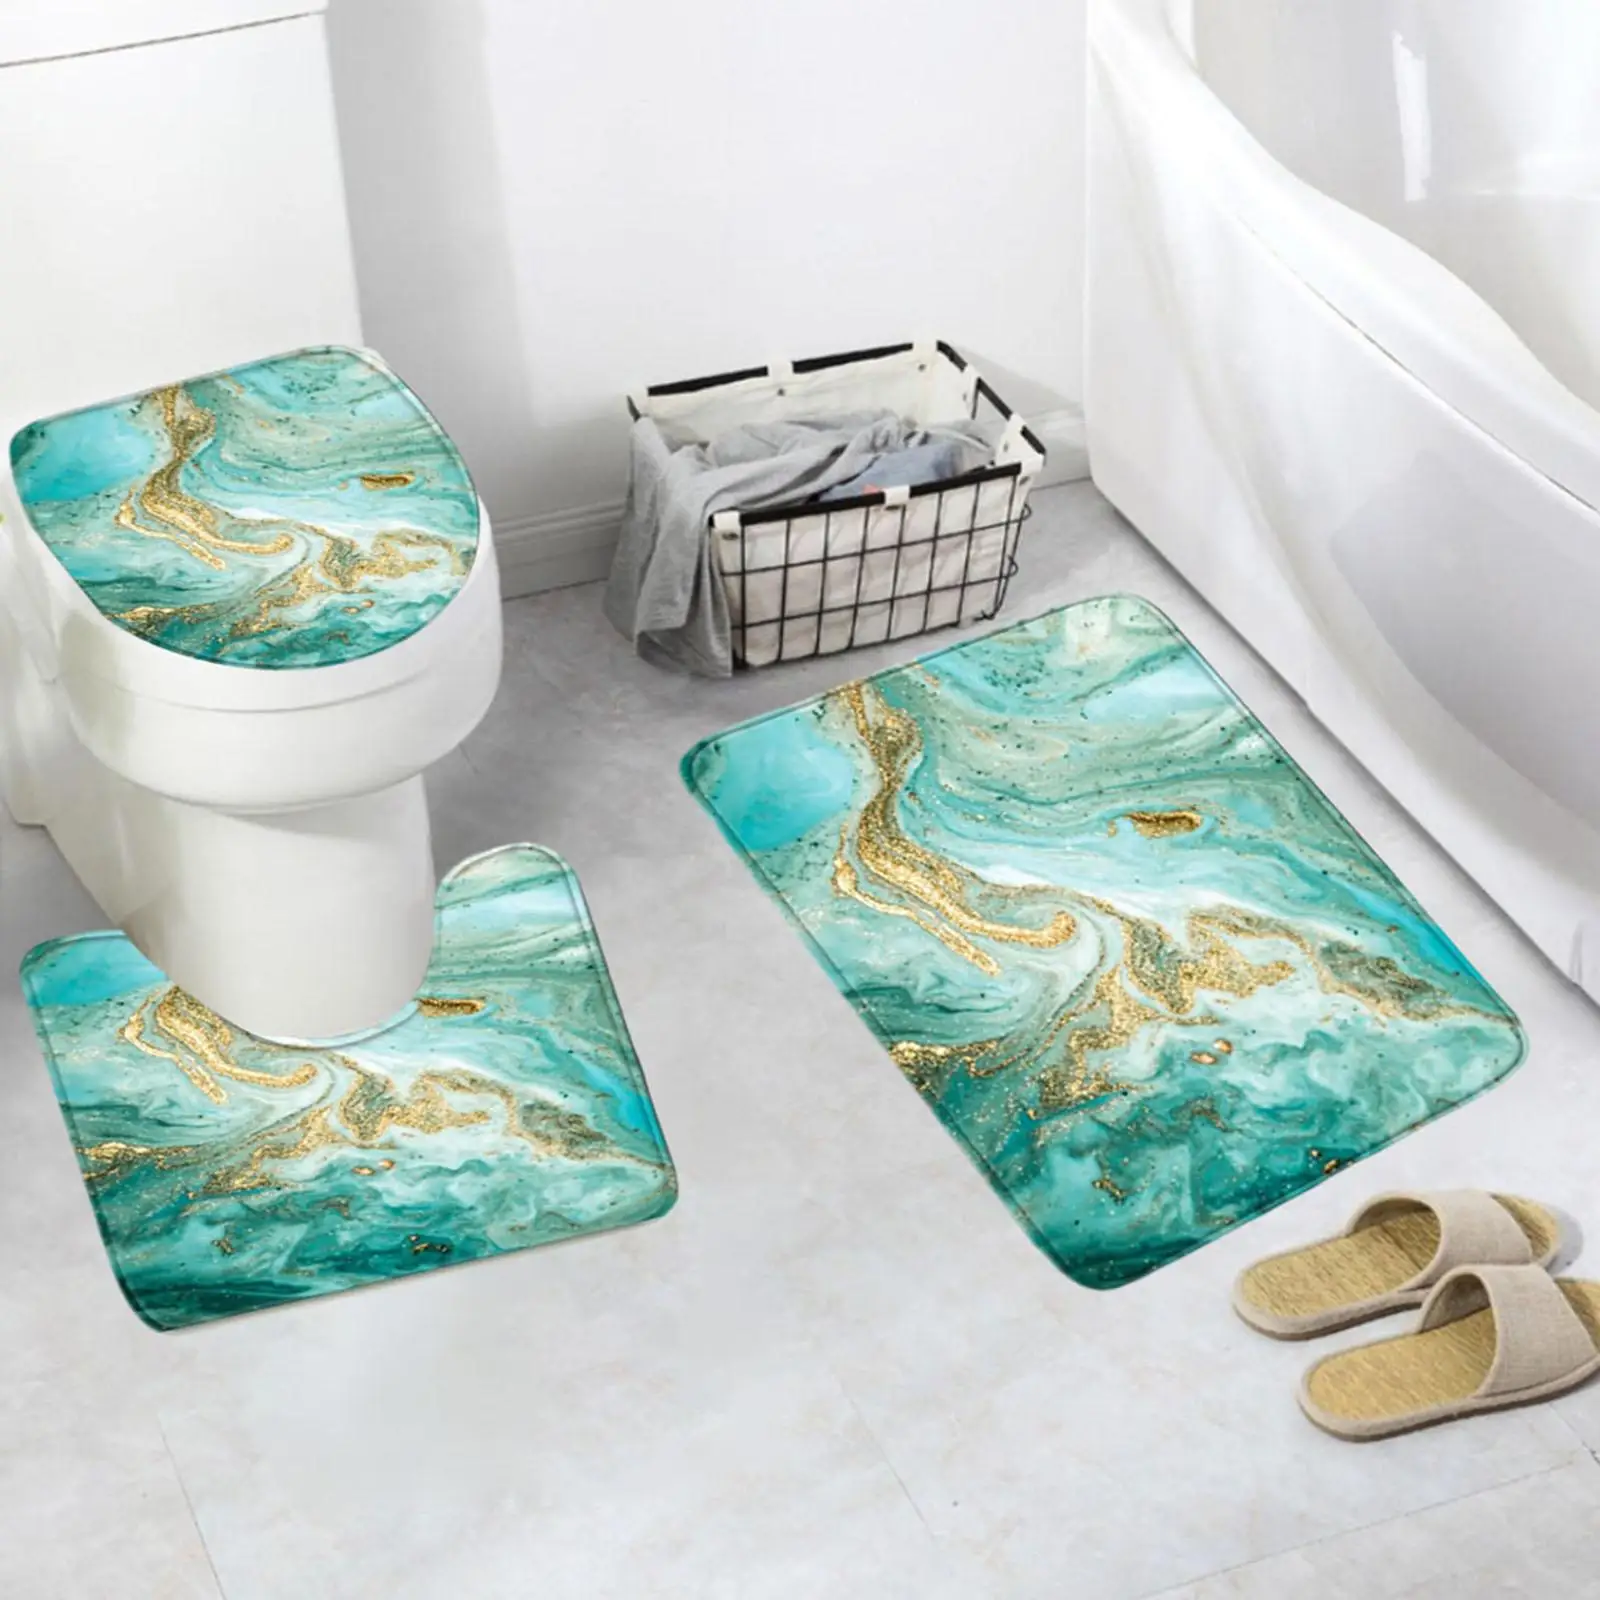 Bathroom Rugs Set 3 Pieces Bath Rug Floor Rug Mats Anti Skid with Toilet Seat Cover